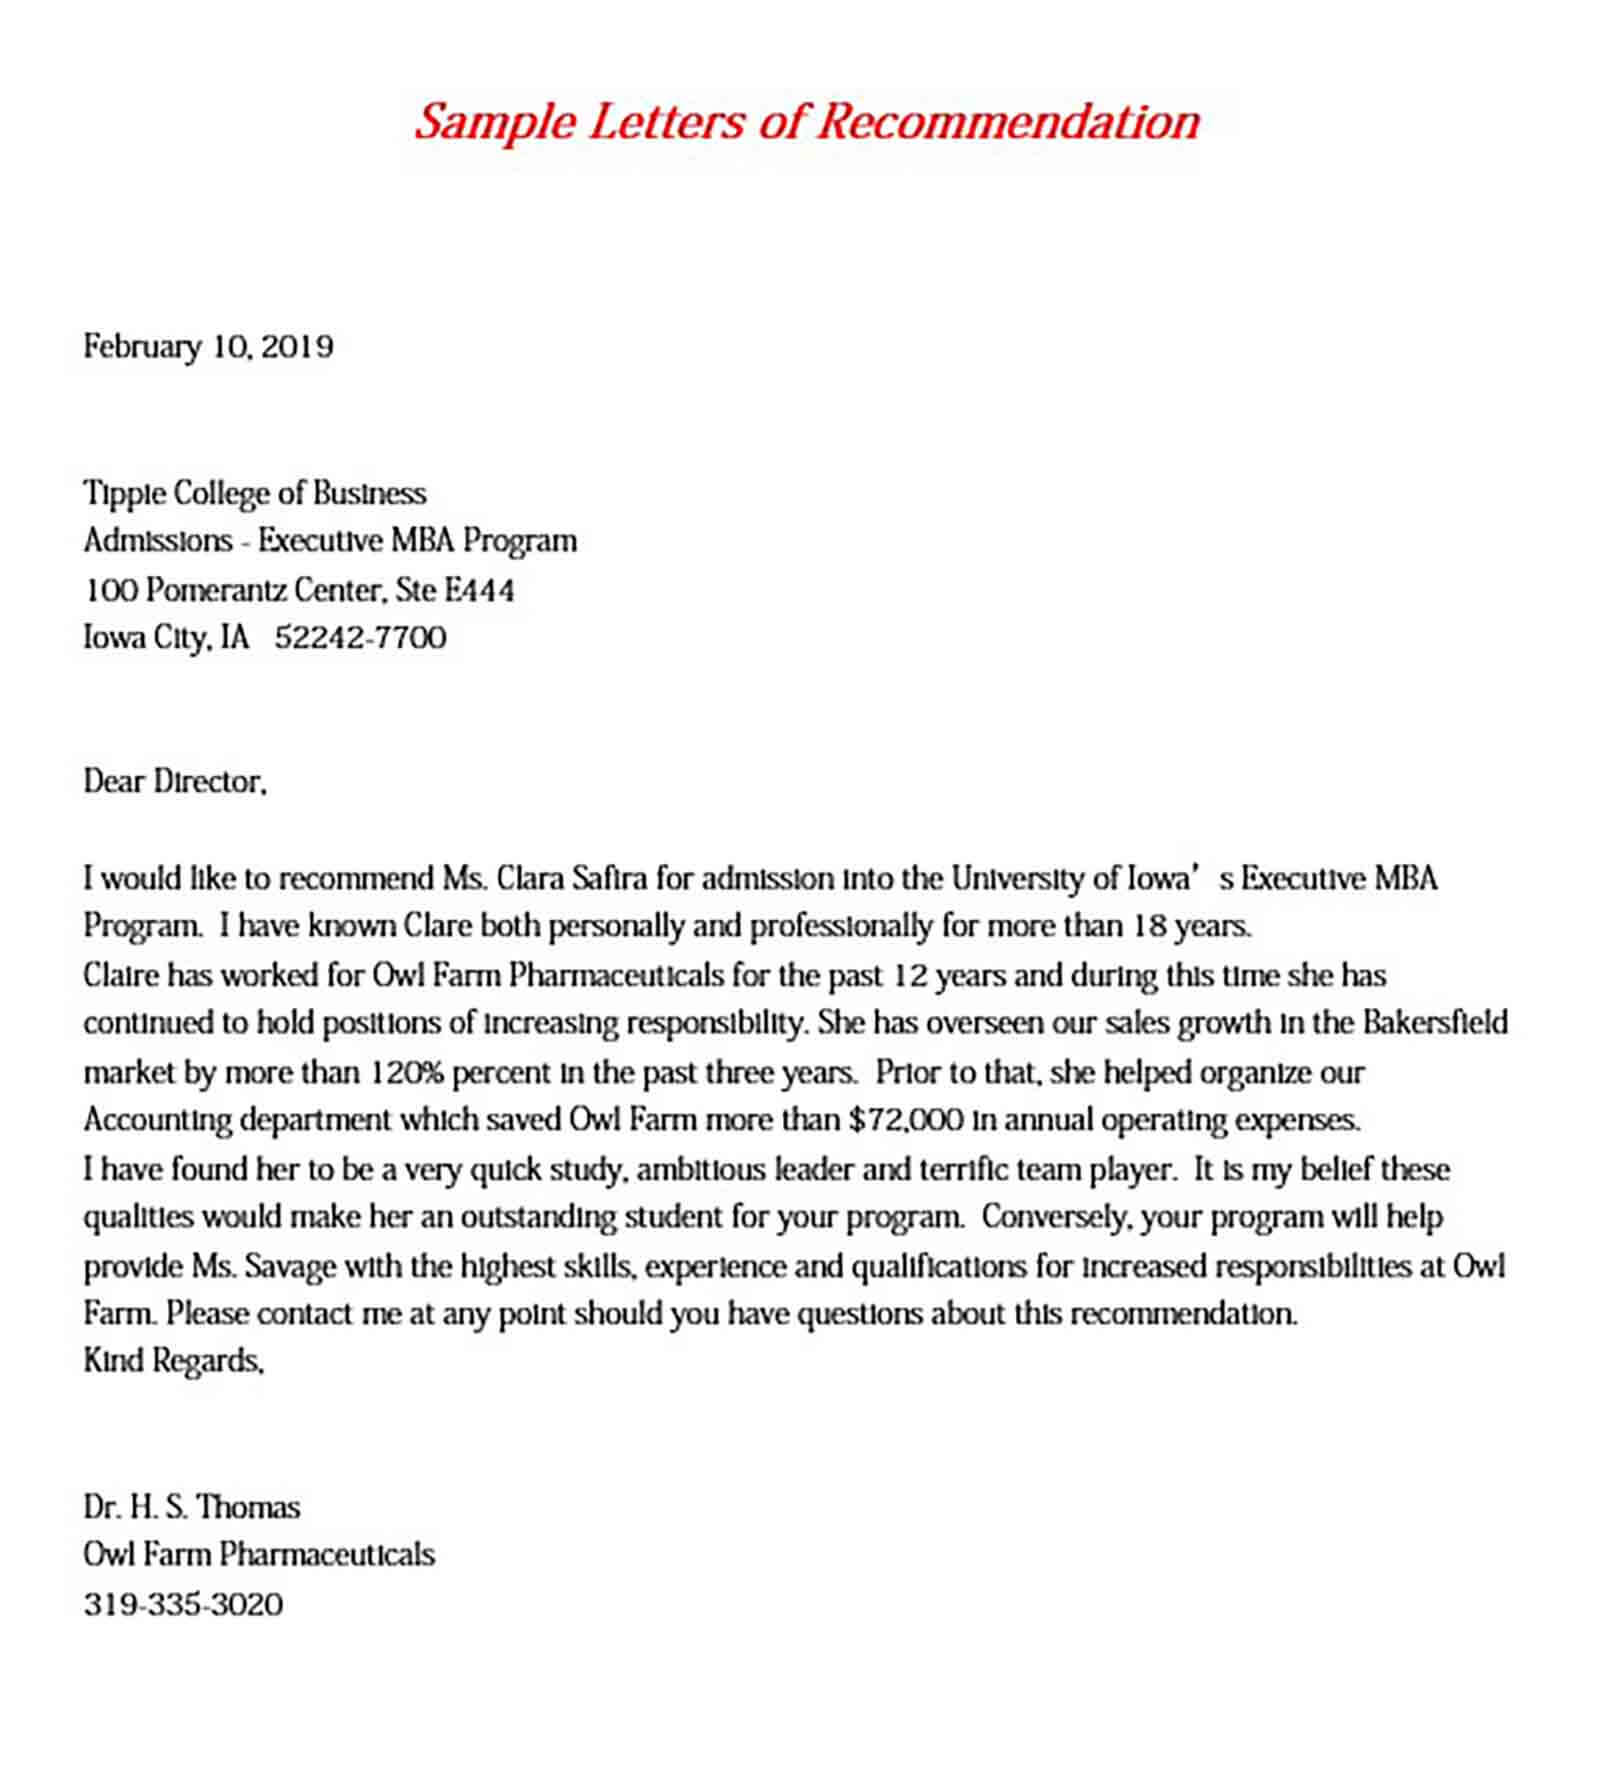 Mba Recommendation Letter Sample from moussyusa.com